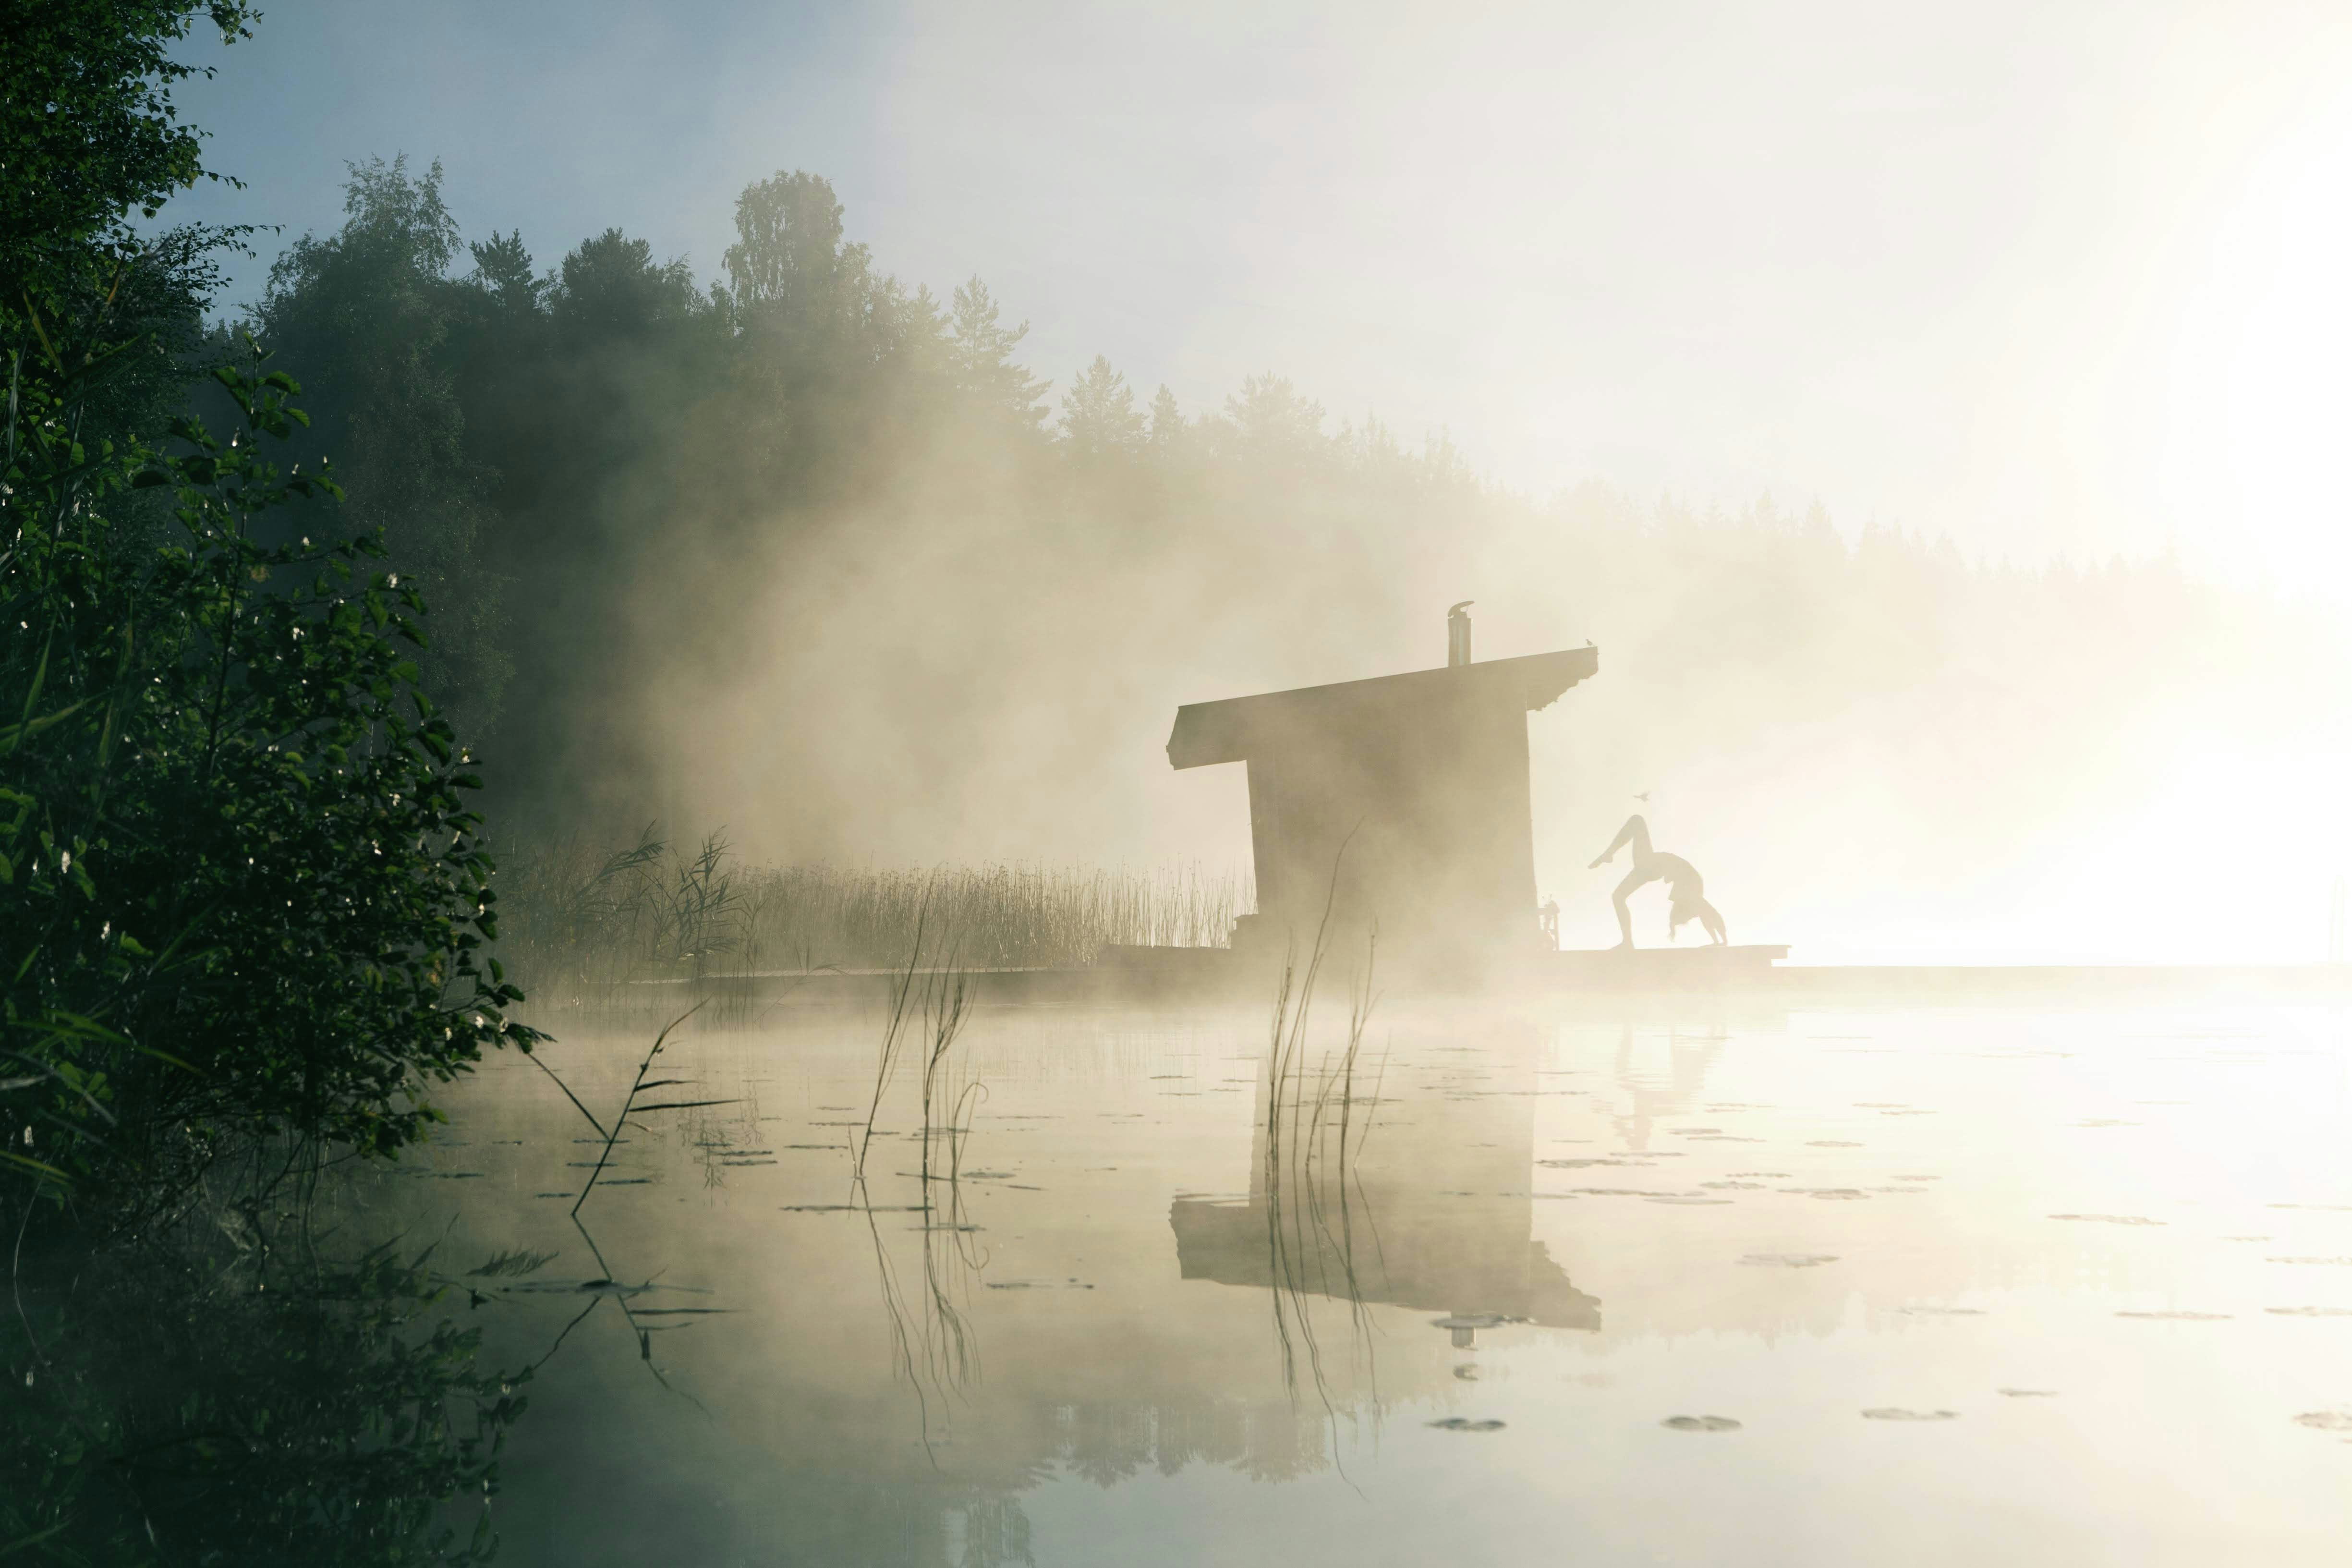 A person performing a yoga pose on a wooden dock in a misty lakeside setting, with the morning sun creating a bright backdrop and the surrounding nature partially obscured by fog